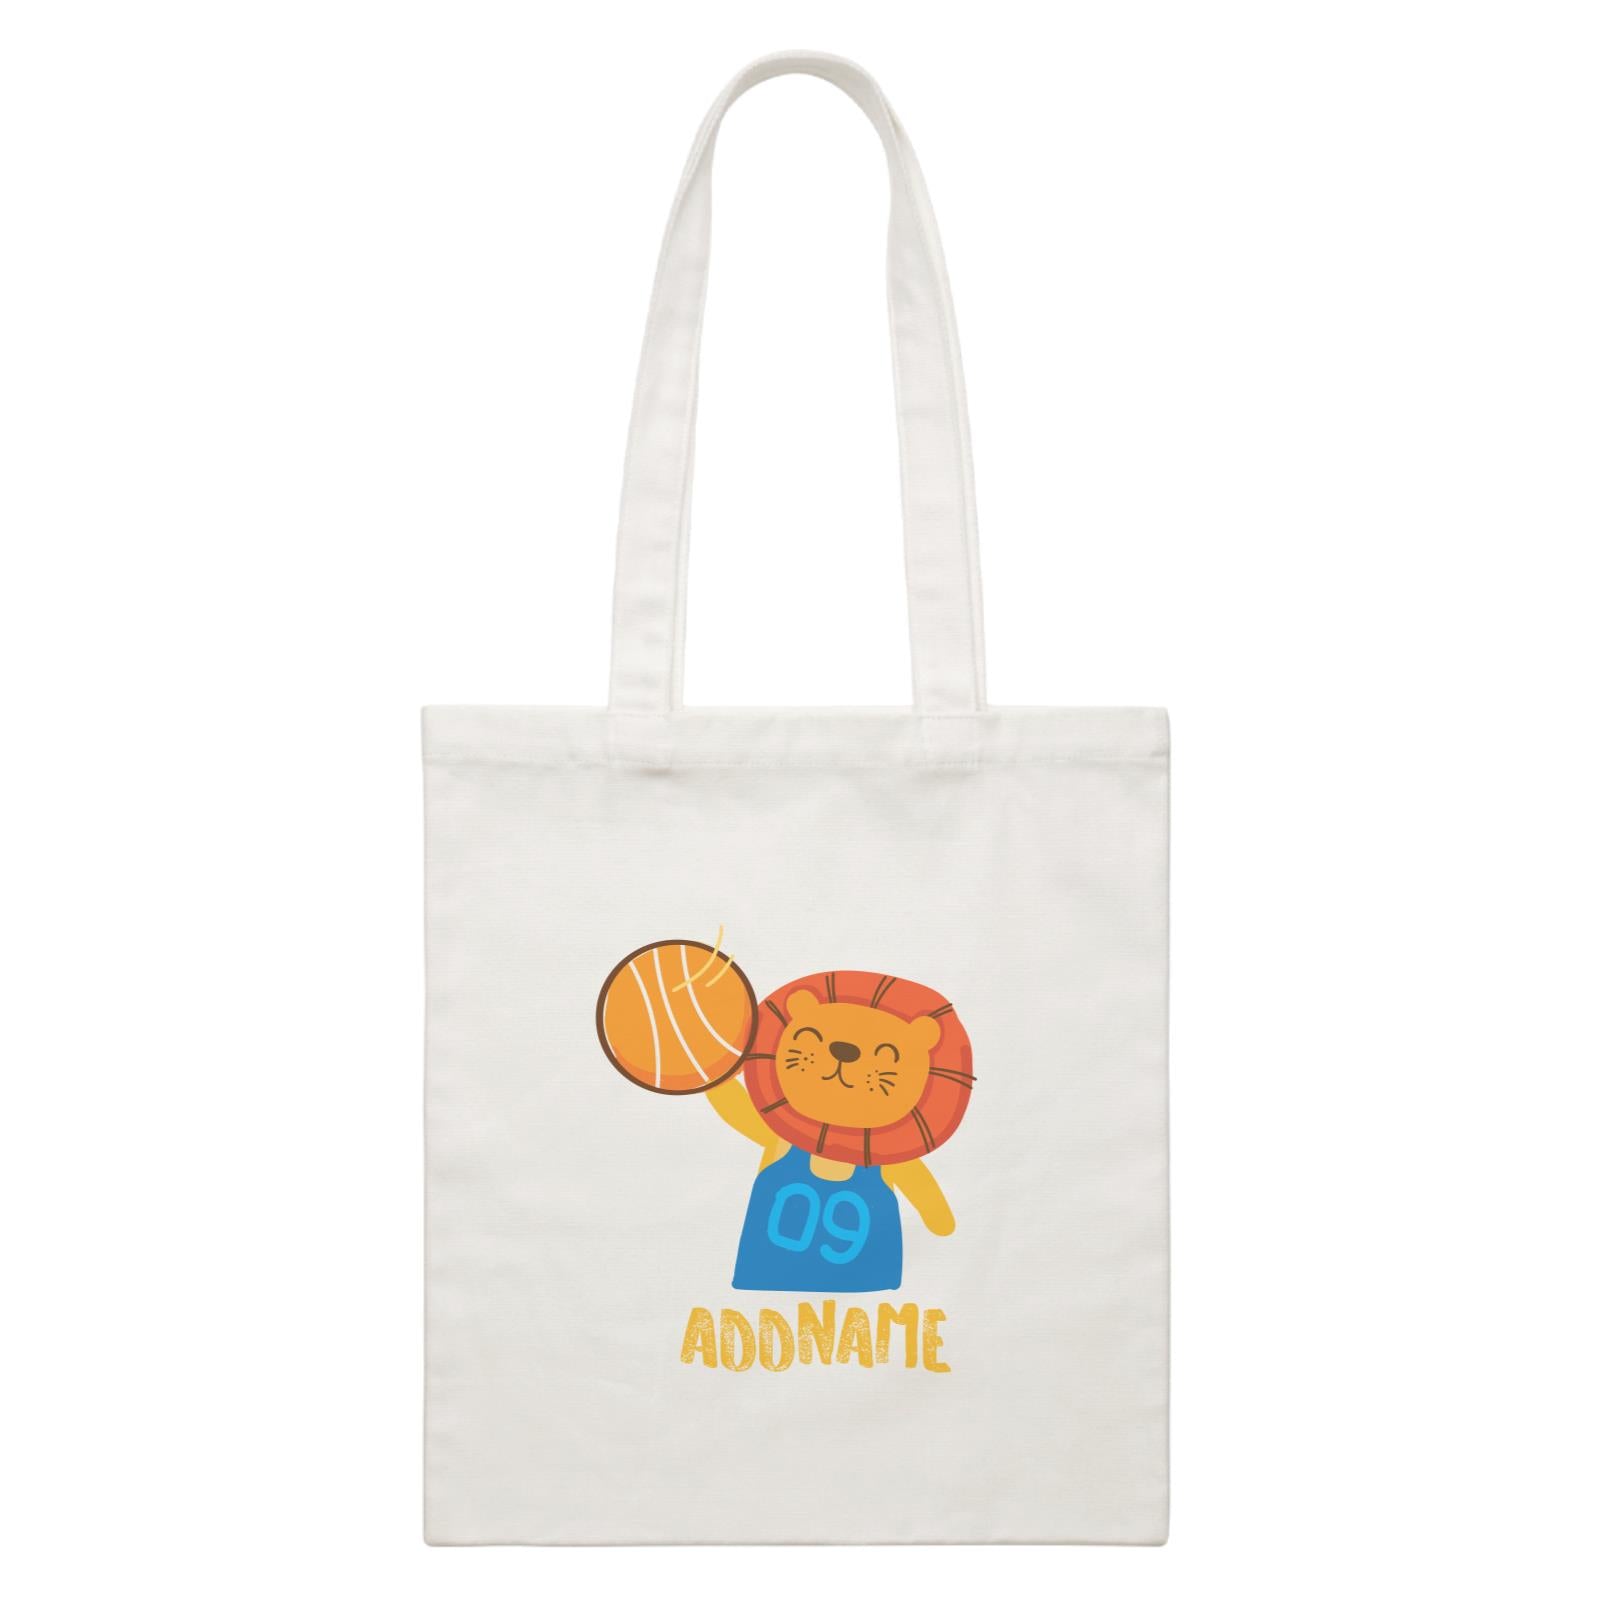 Cool Cute Animals Lion Basketball Player Addname White Canvas Bag